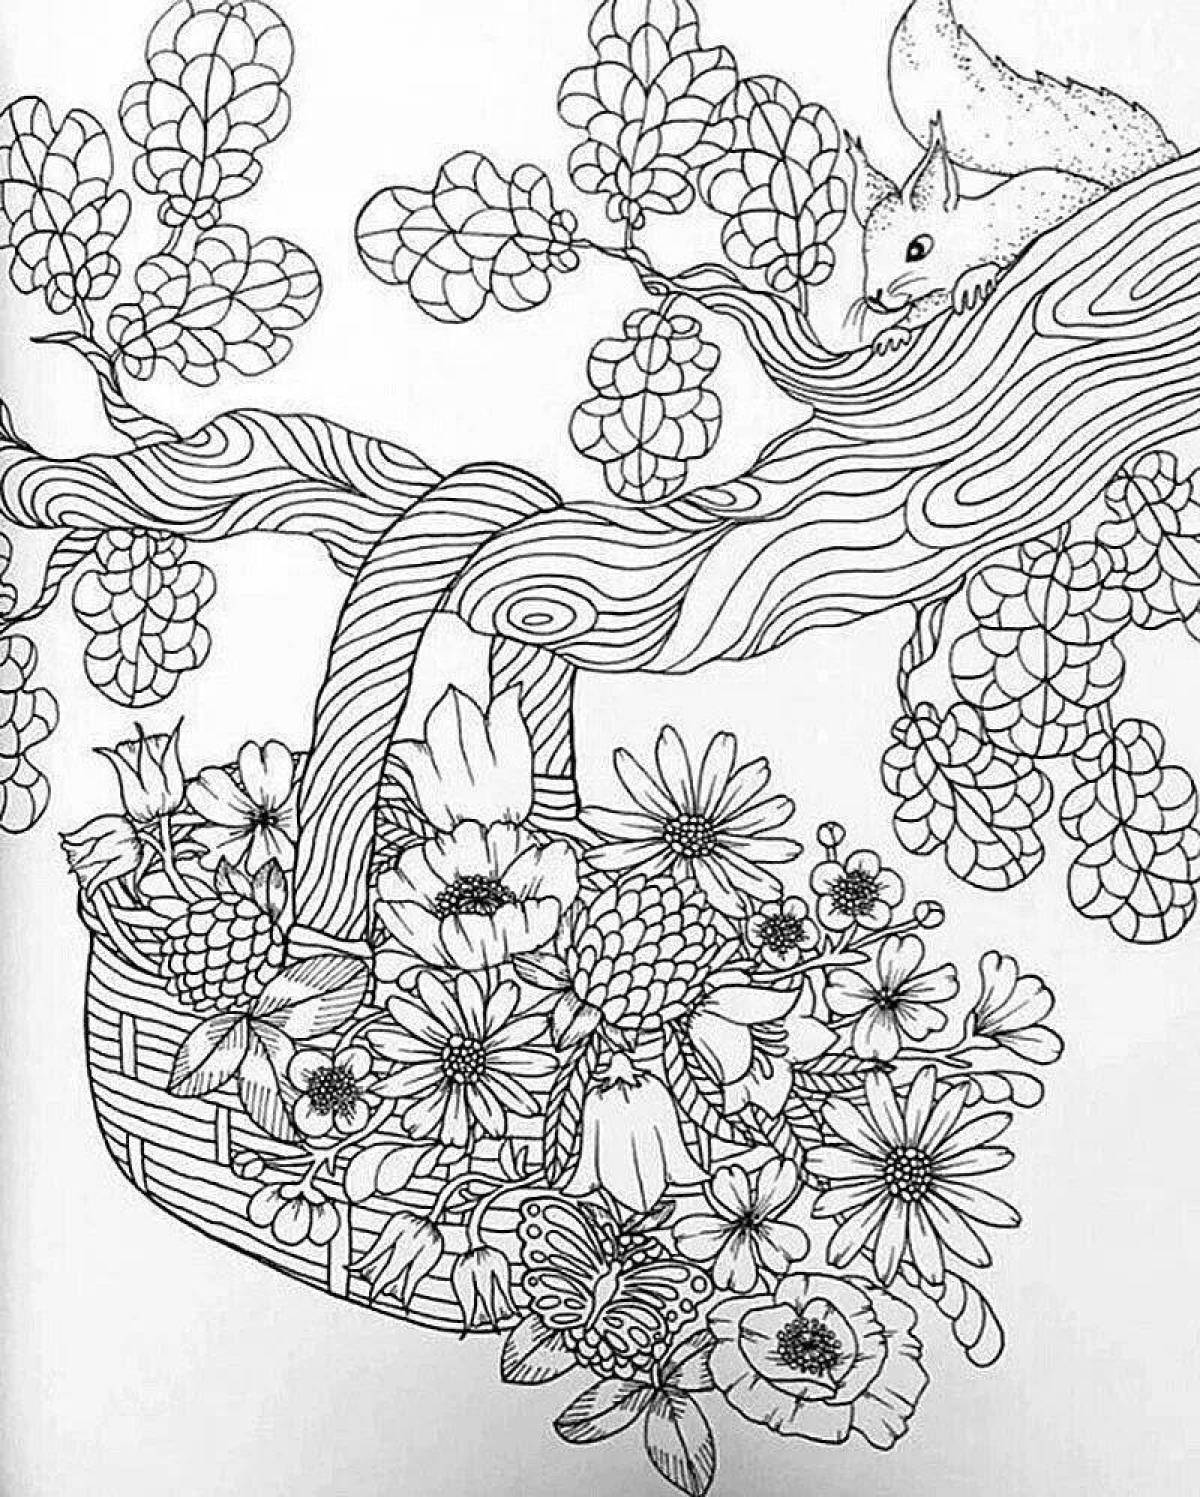 Enlivening nature anti-stress coloring book